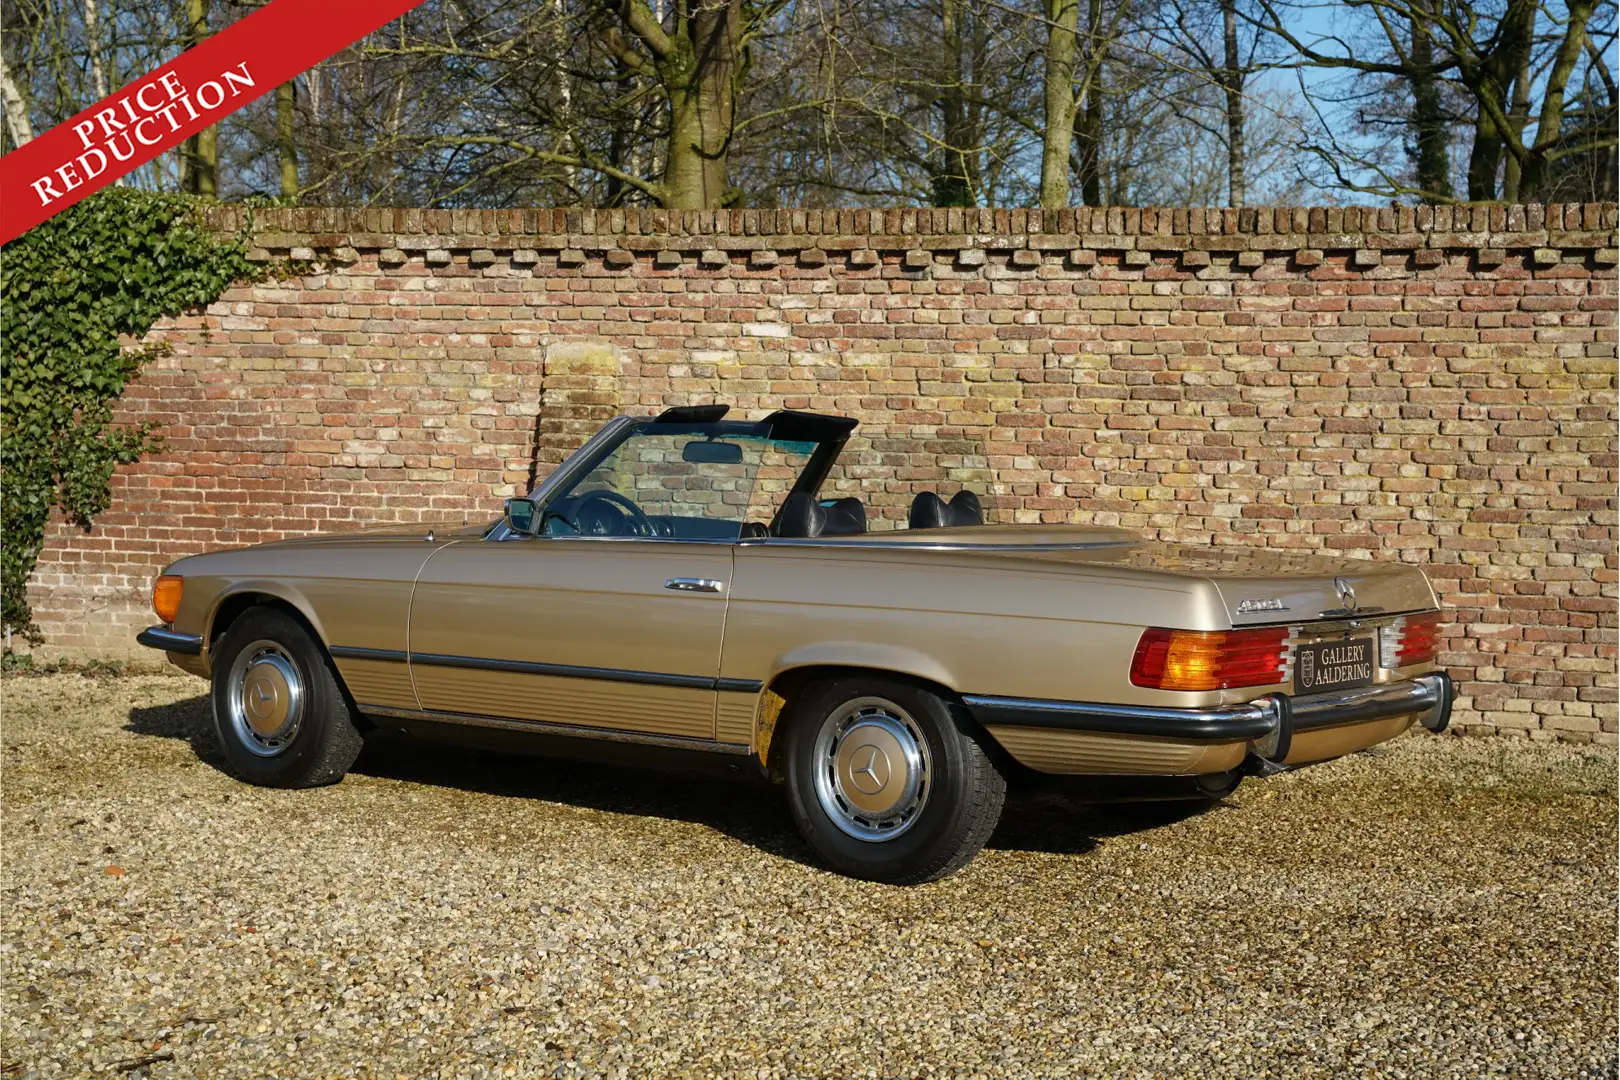 Mercedes-Benz SL 450 PRICE REDUCTION! Livery in Icon Gold (419) over Bl Złoty - 2